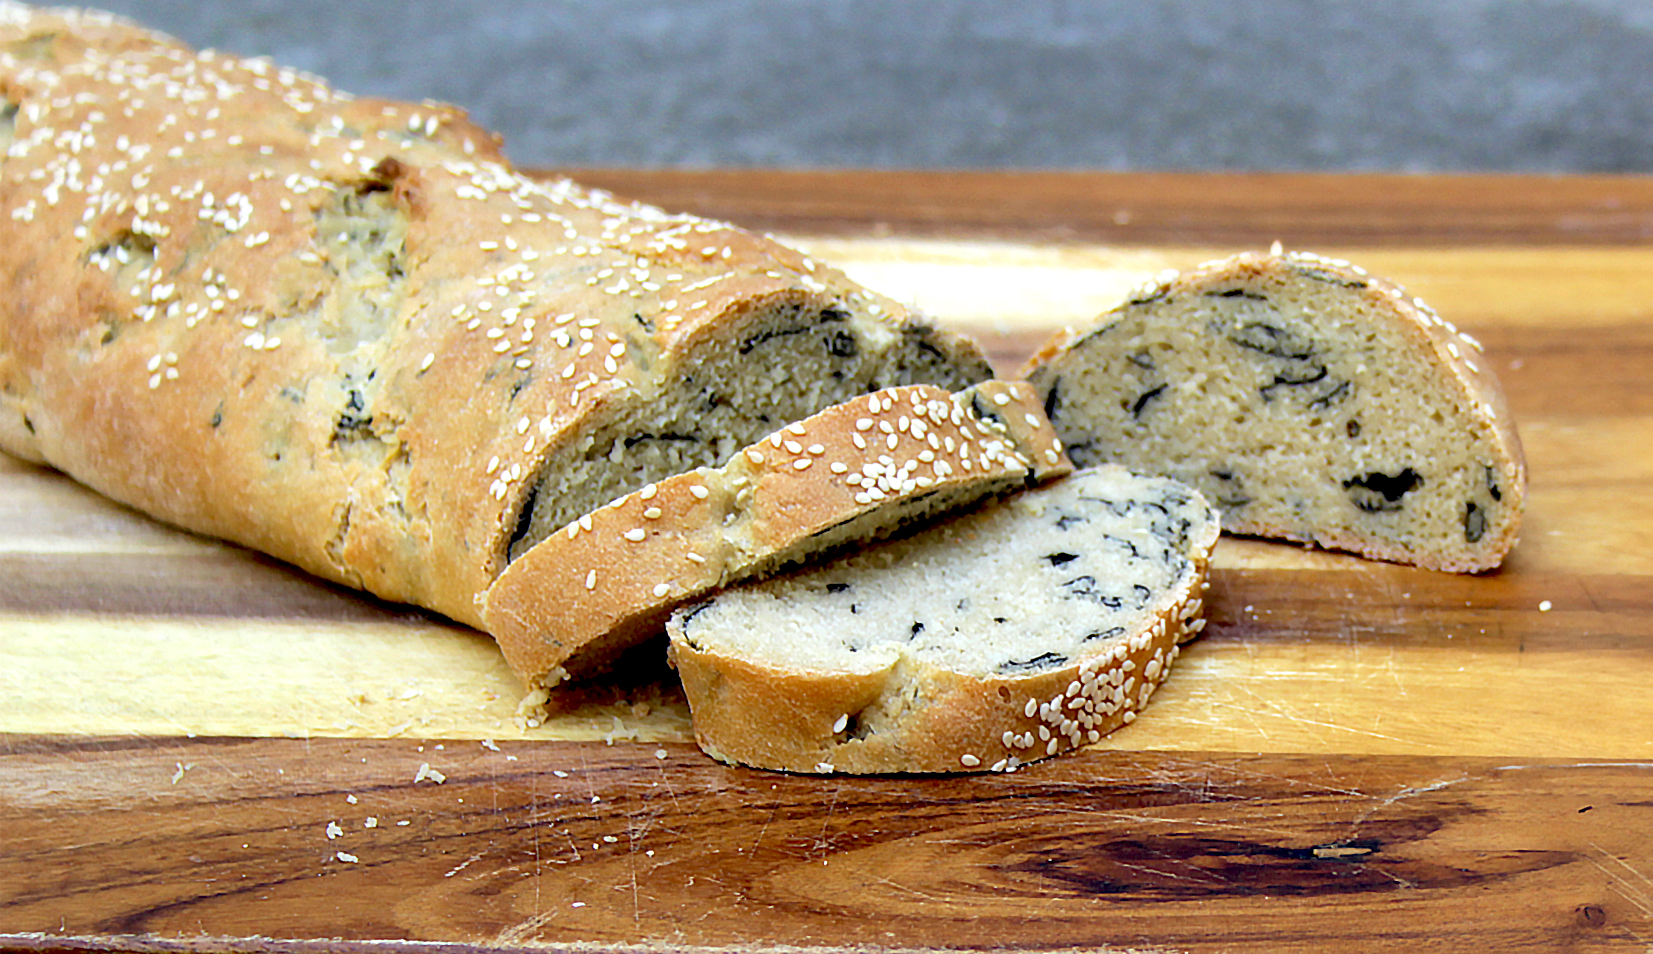 How to make Seaweed Bread?